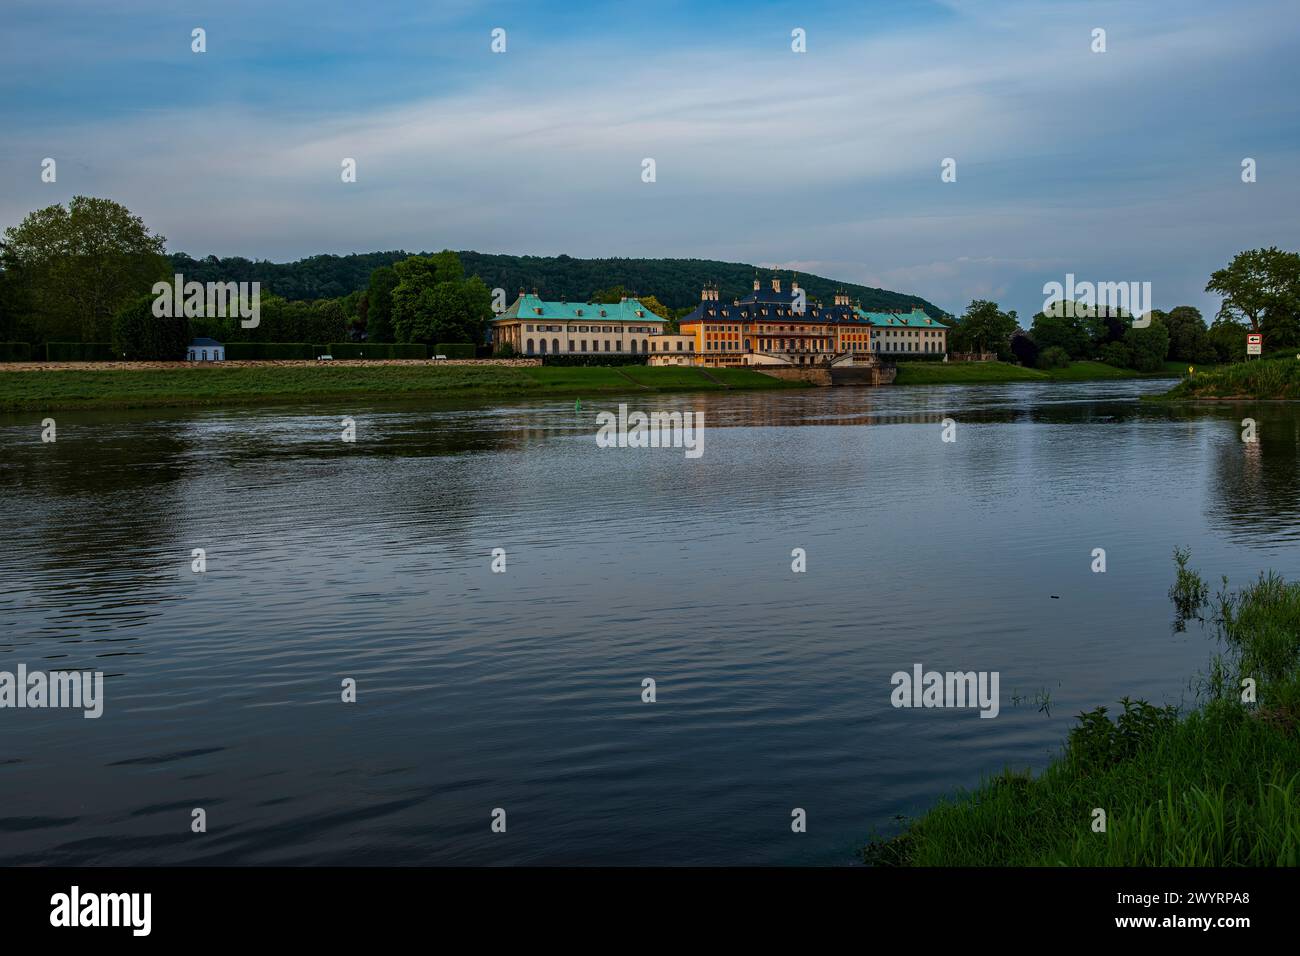 Pillnitz Palace in the evening sun, seen from the opposite banks of the Elbe river in Kleinzschachwitz, Dresden, Saxony, Germany. Stock Photo